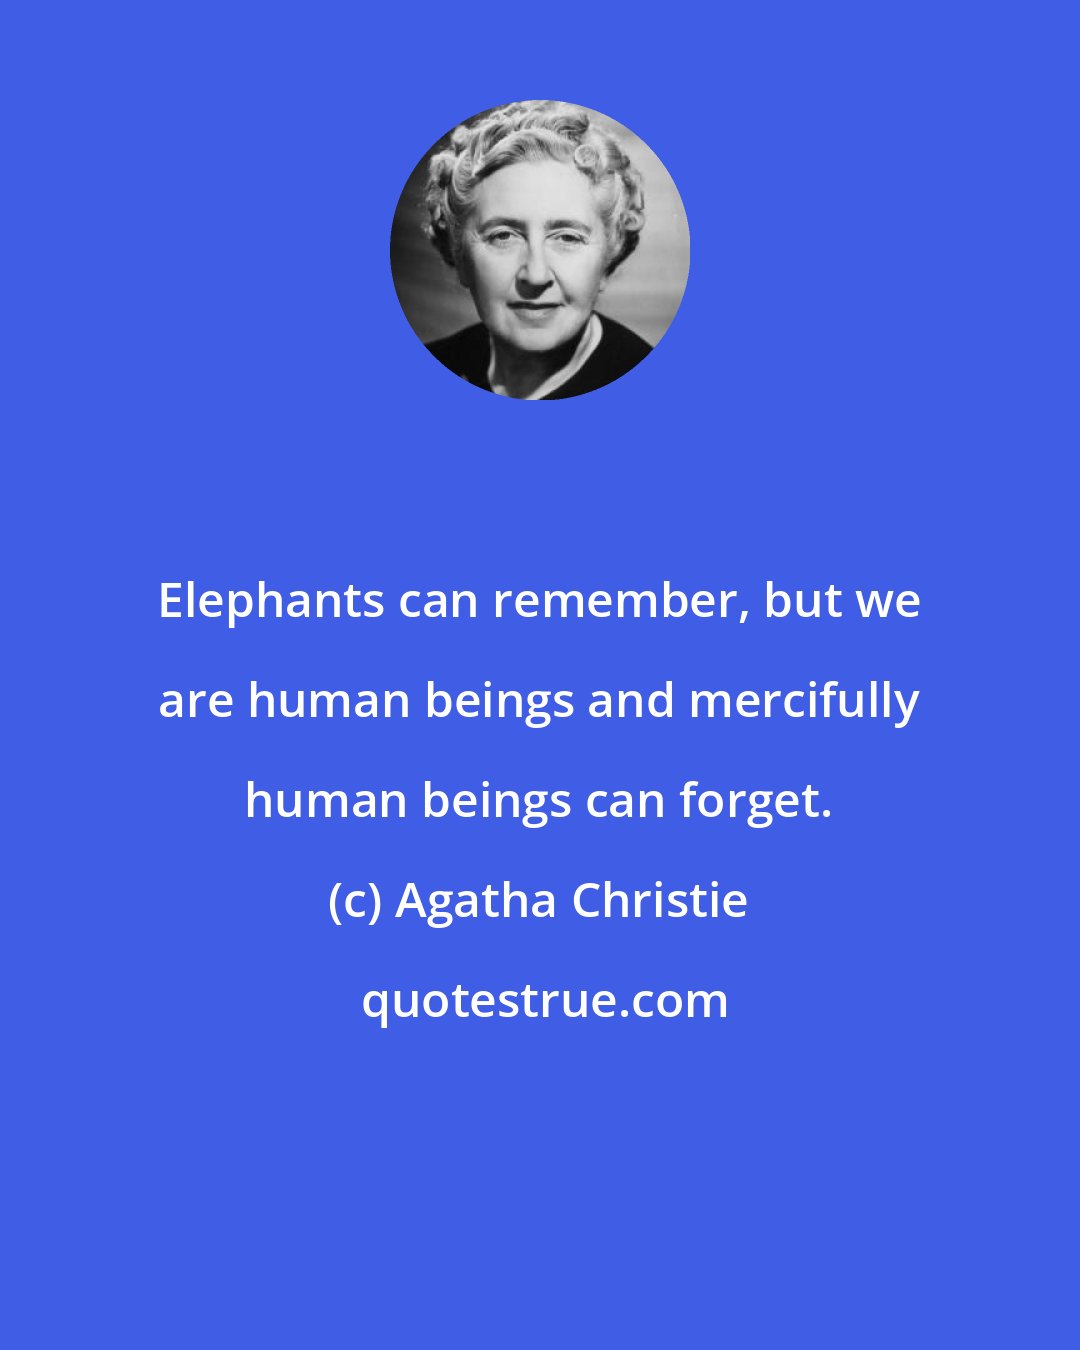 Agatha Christie: Elephants can remember, but we are human beings and mercifully human beings can forget.